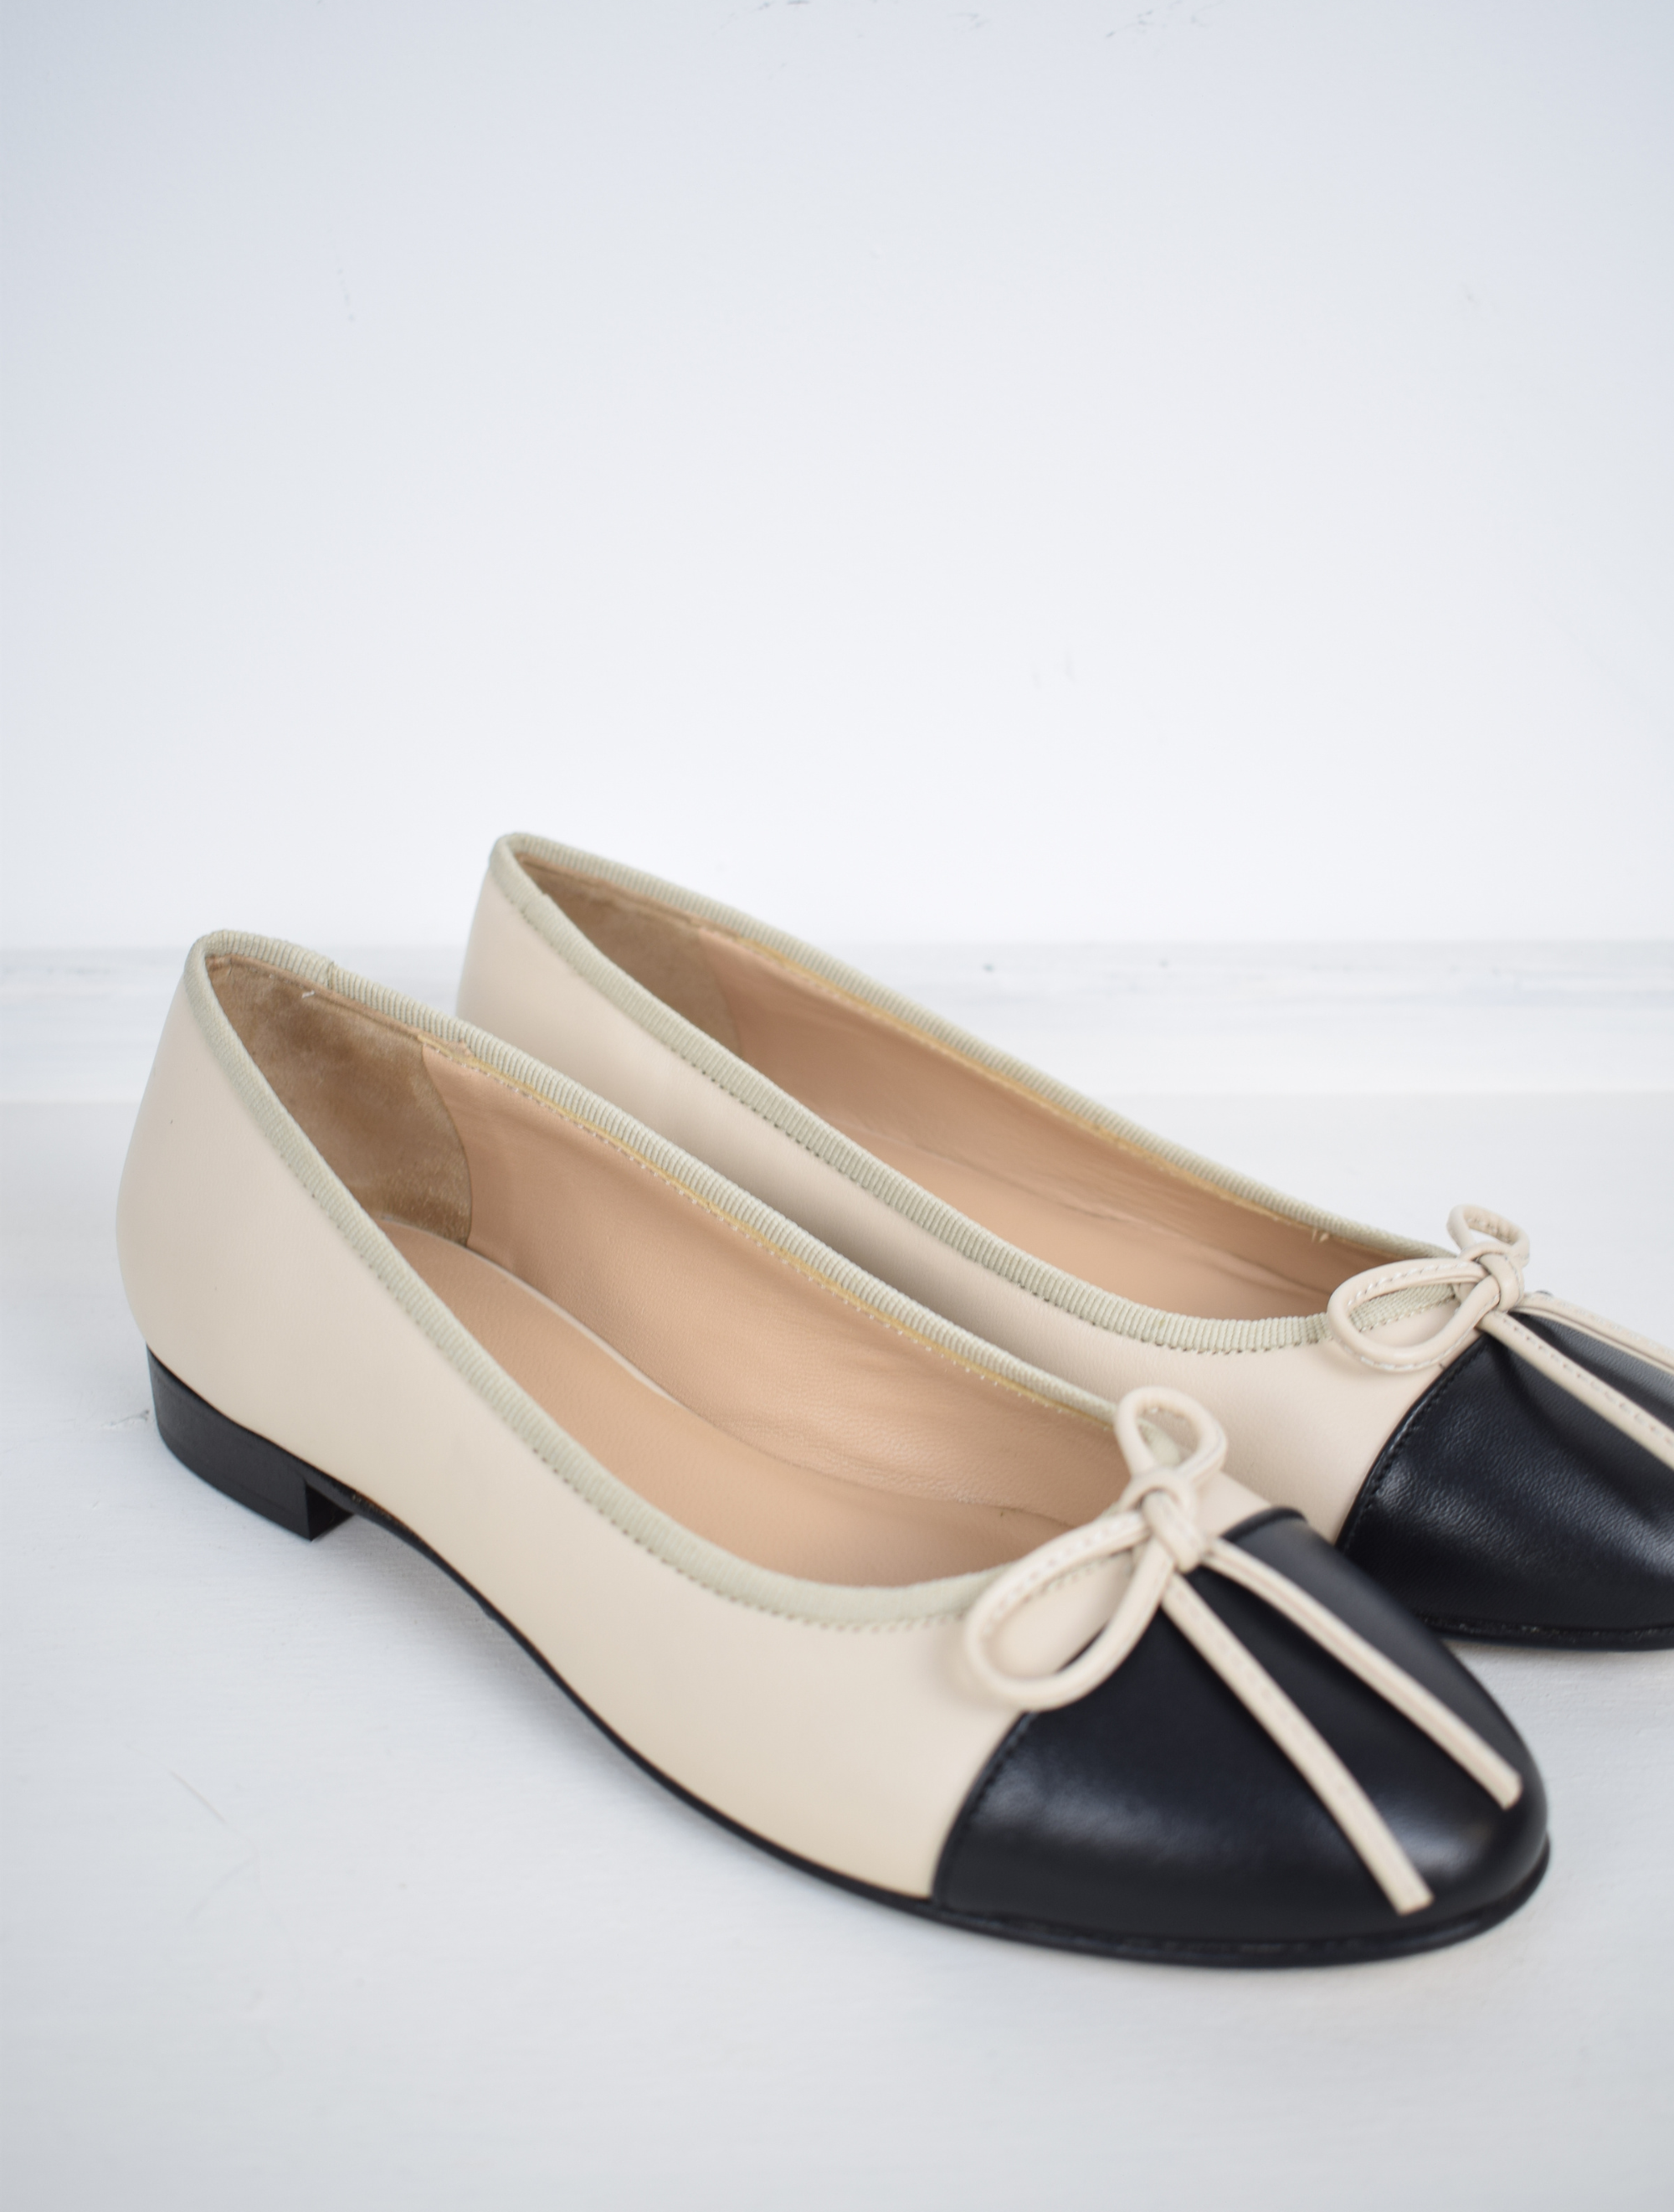 Blush and black ballet pumps with bow and contrast toe